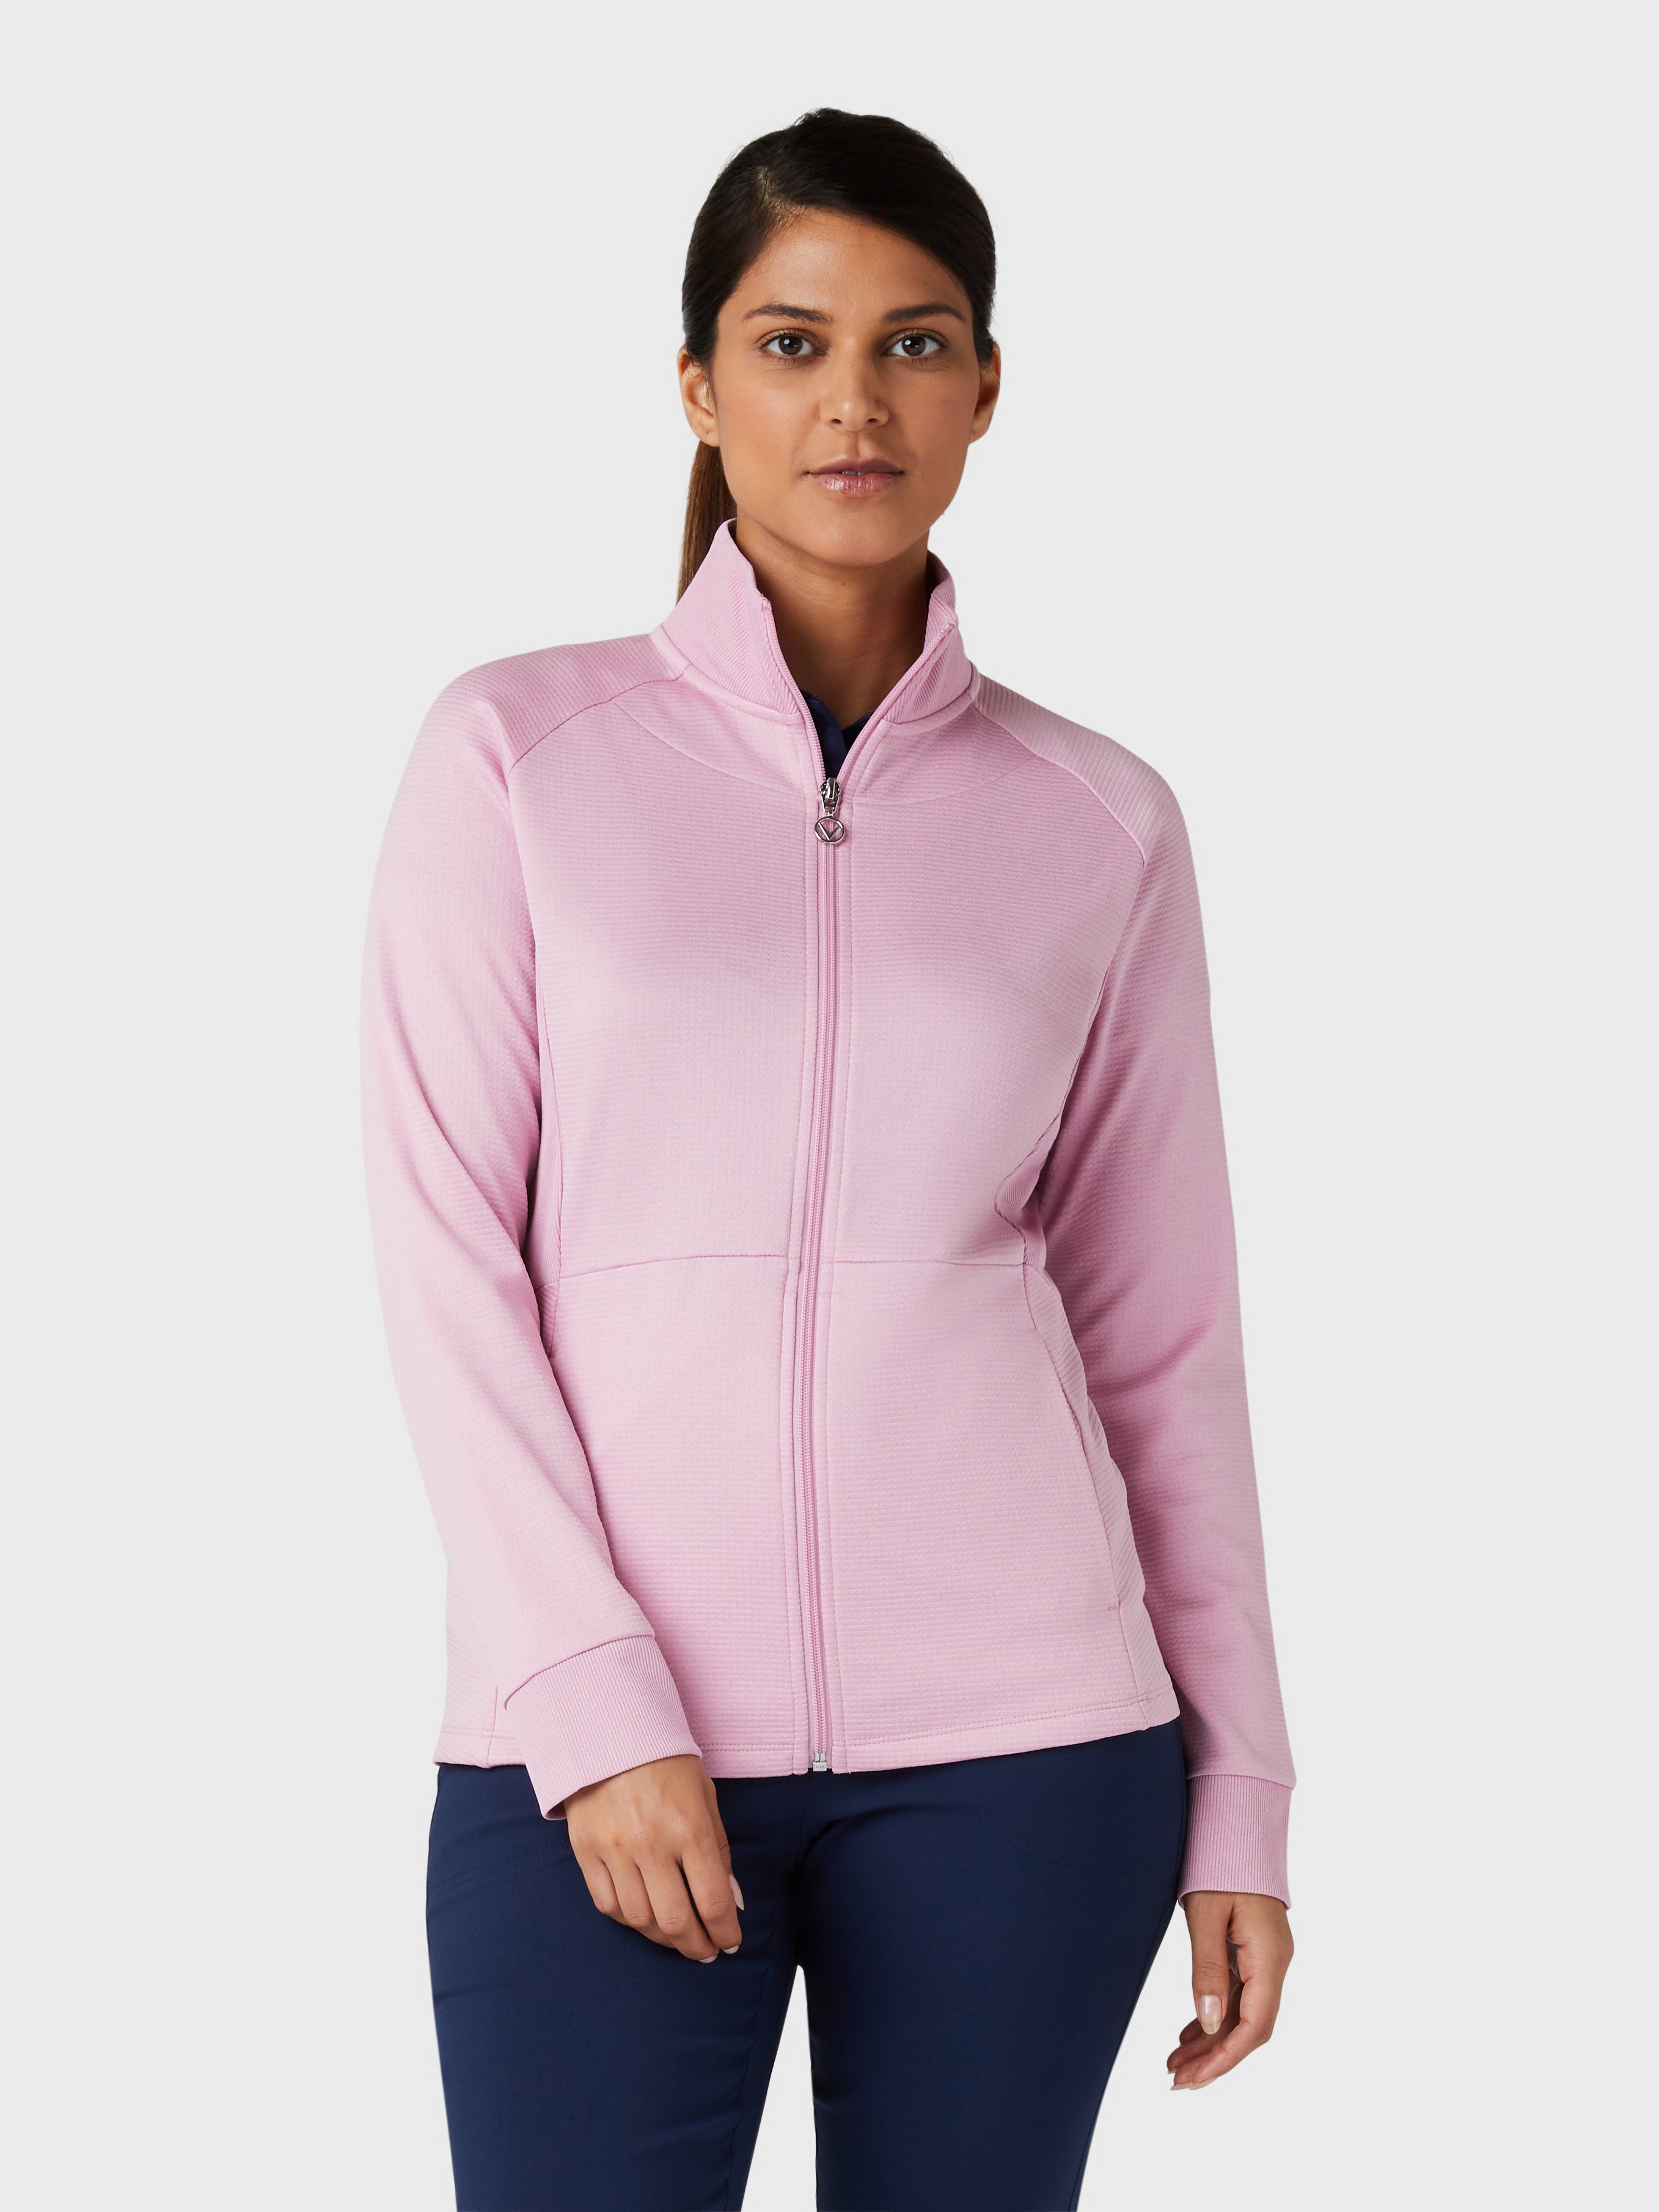 View Midweight Waffle Fleece Womens Jacket In Pink Nectar Heather Pink Nectar Htr L information